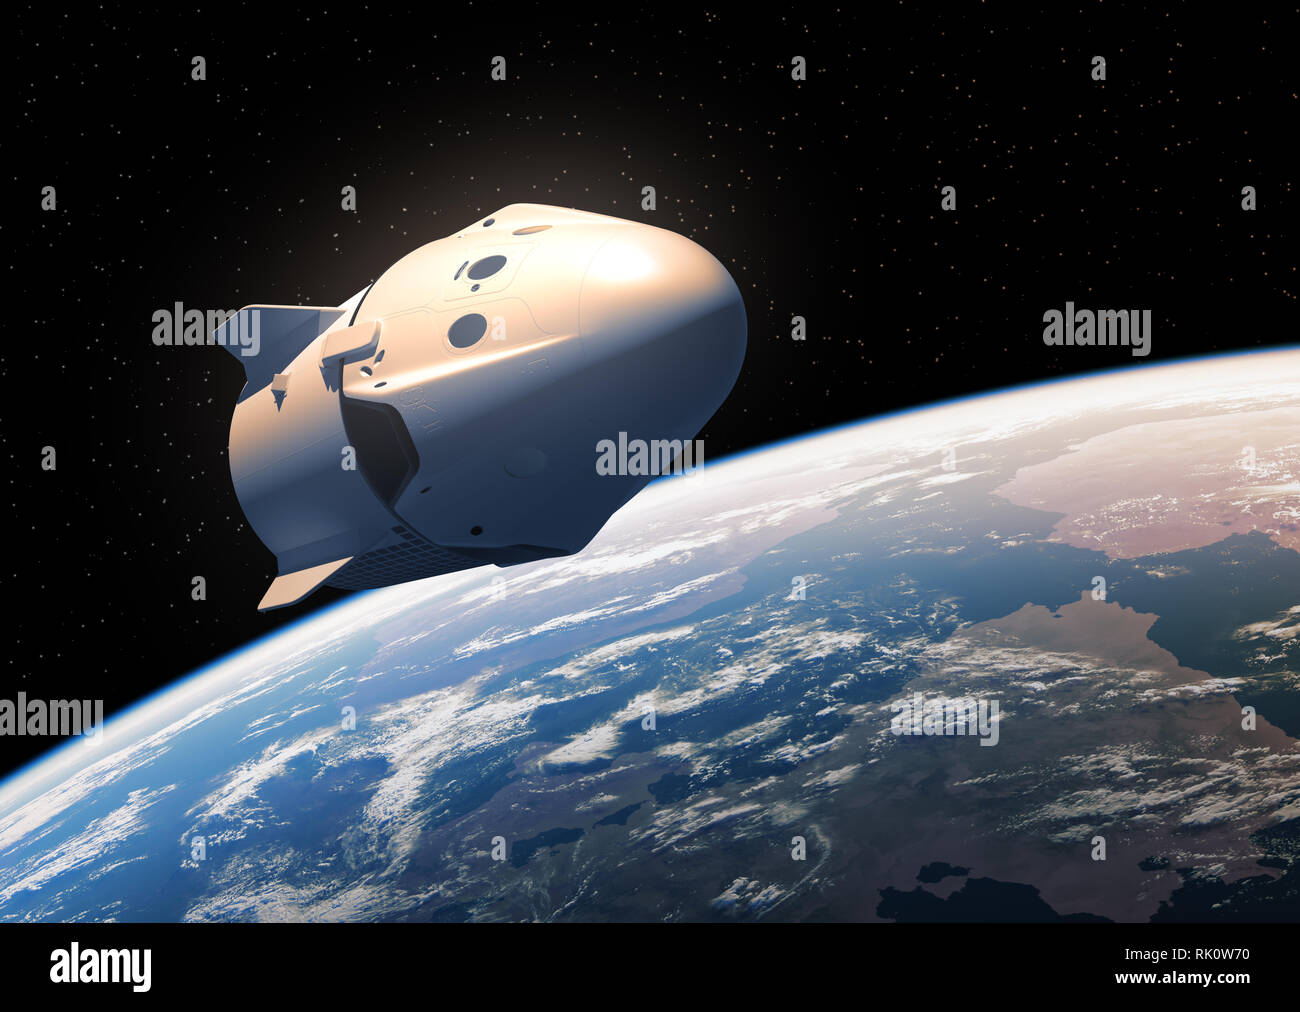 Commercial Spacecraft In Outer Space. 3D Illustration. Stock Photo